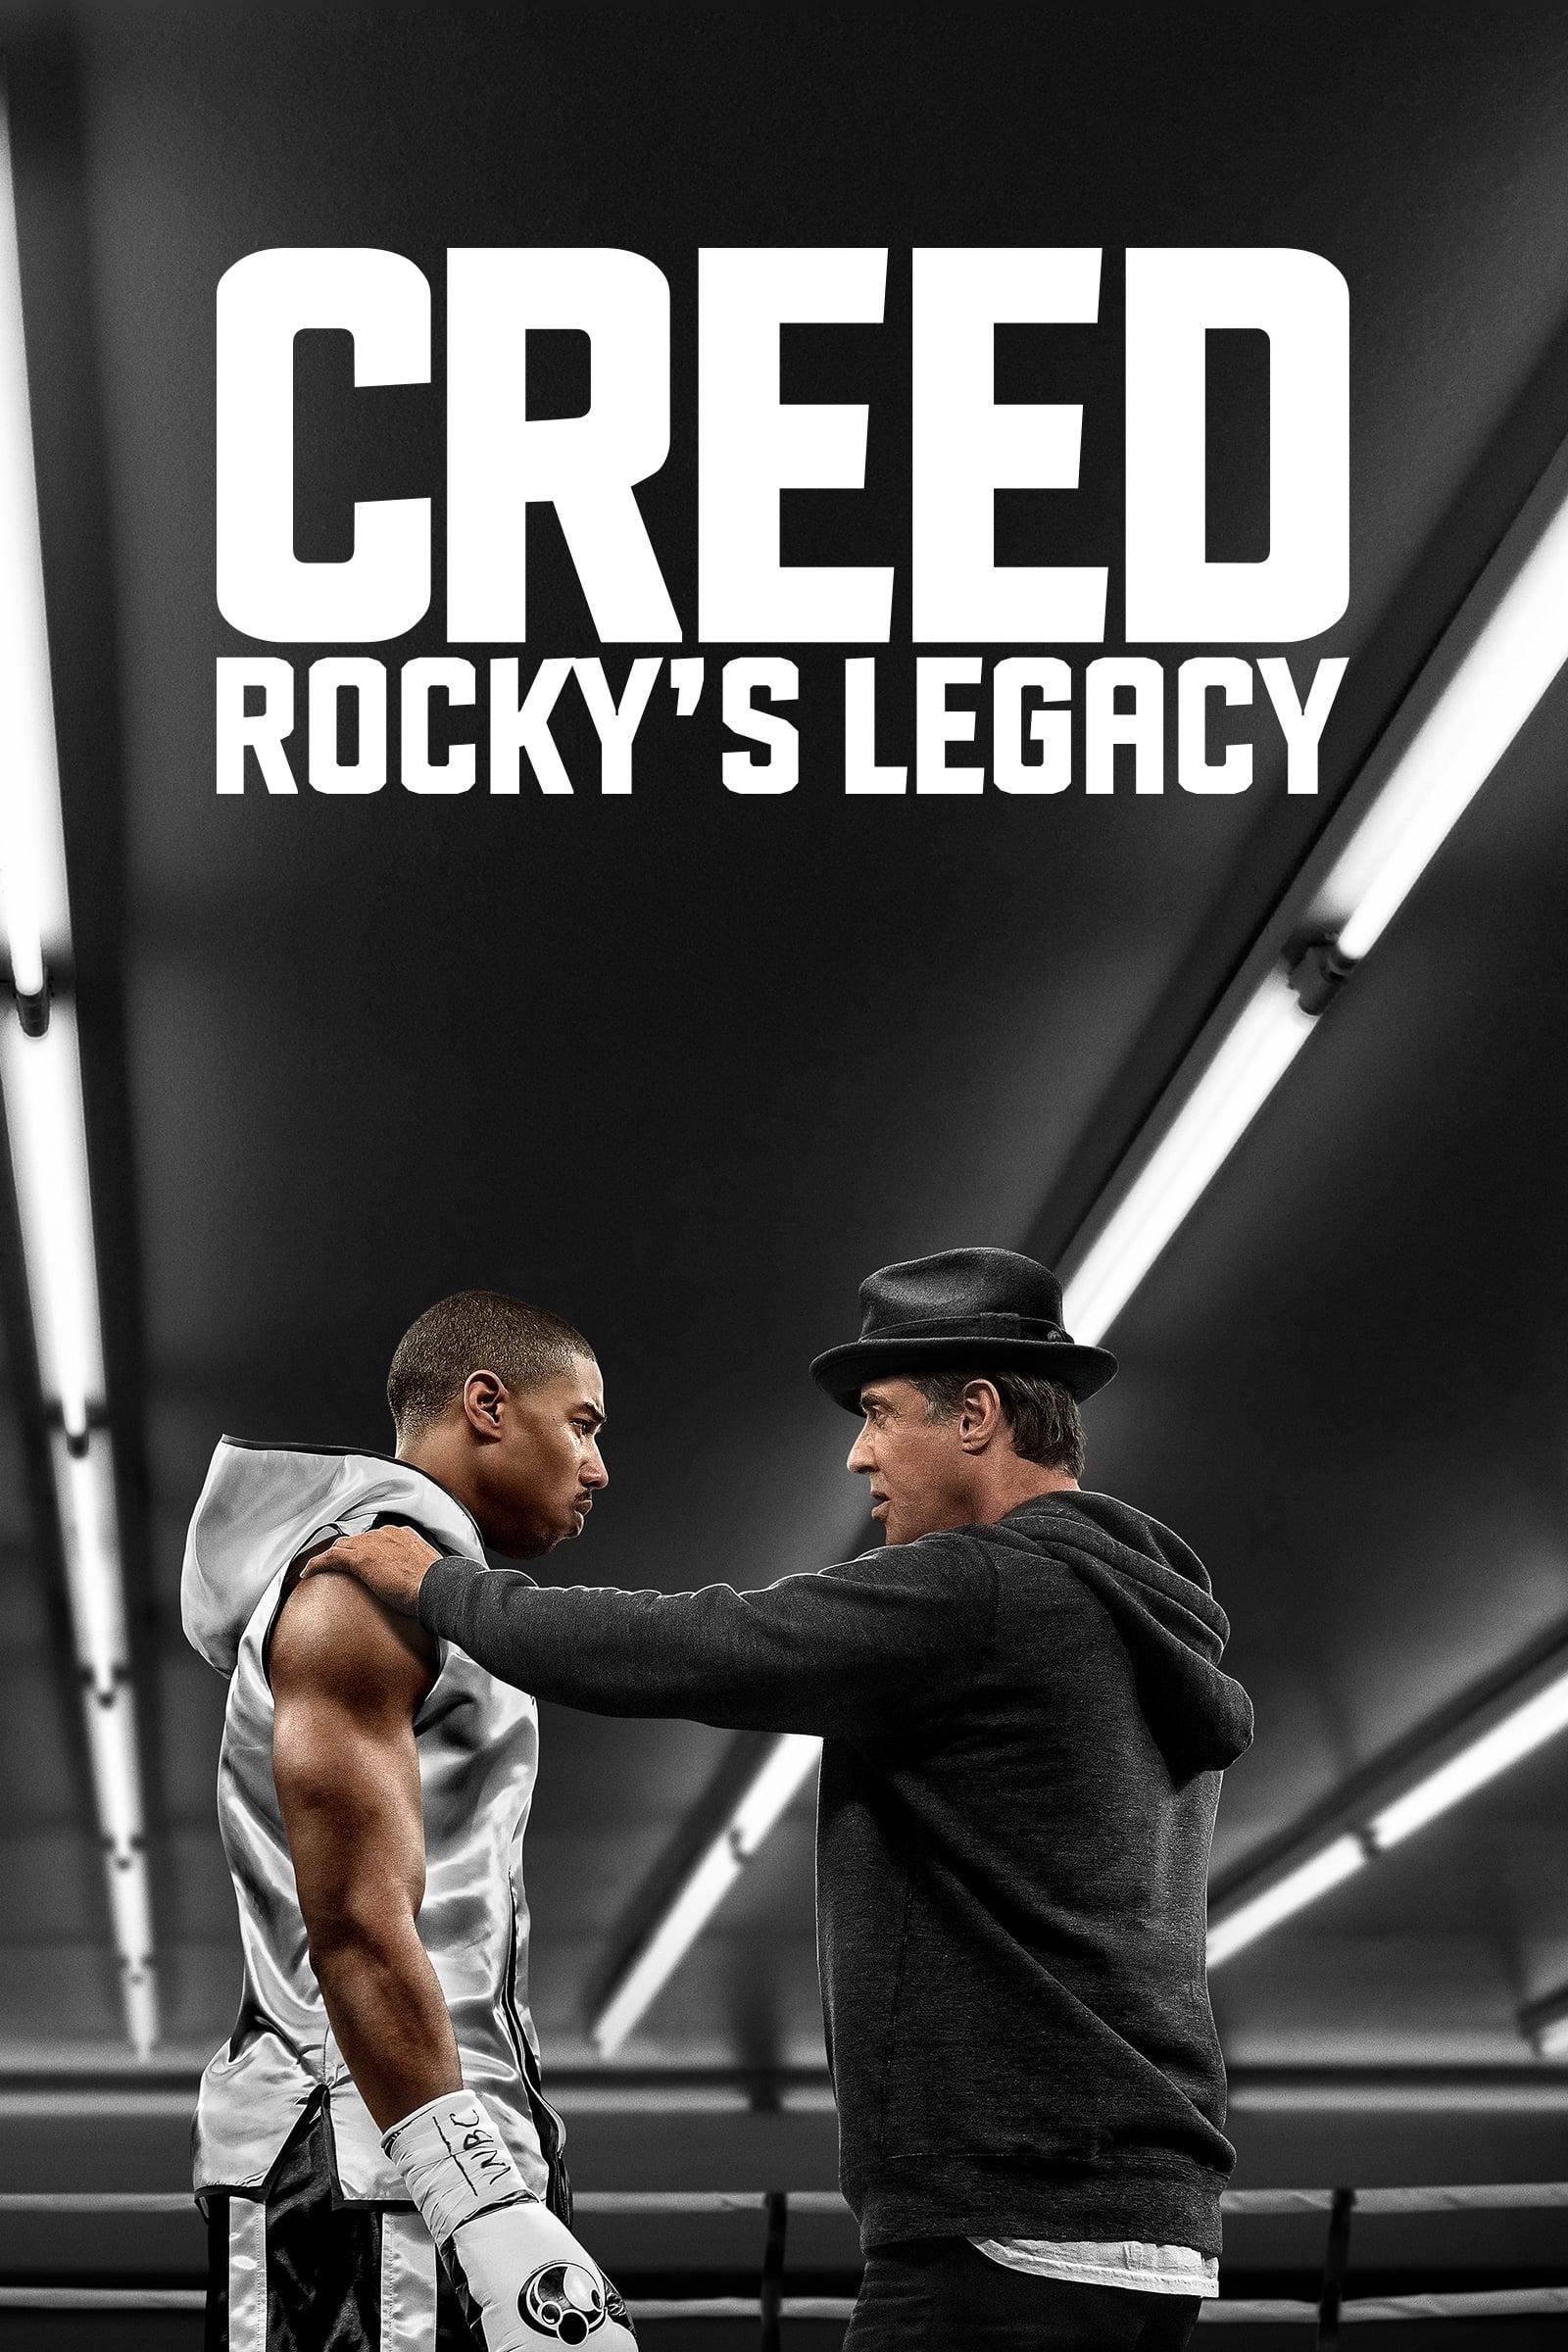 Creed - Rocky's Legacy poster